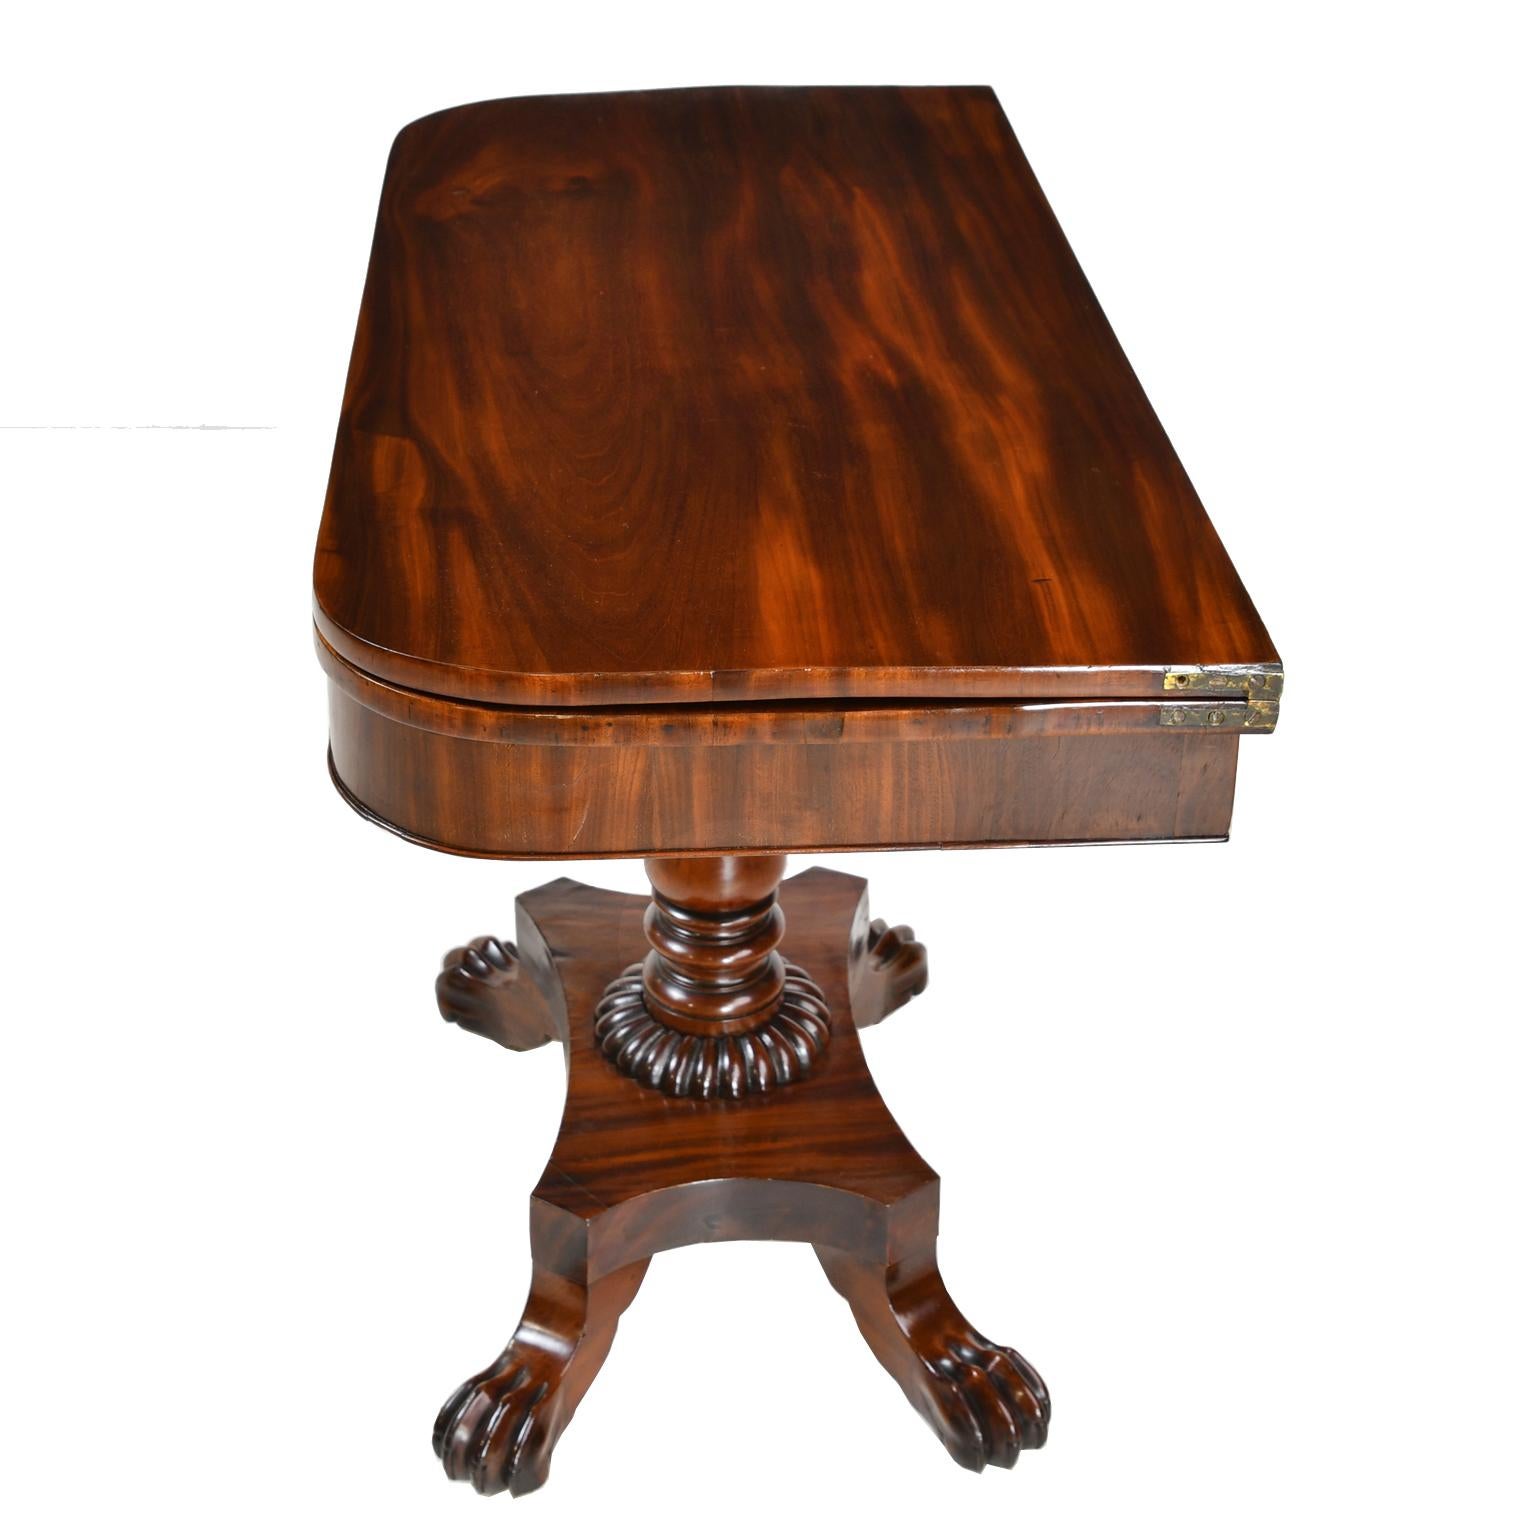 A beautiful American Empire card or games table in West Indies mahogany with hinged top opening to a square over a rectangular base with turned column that rests on a quatre-form base on carved lions paw feet. A cartouche with carved foliage